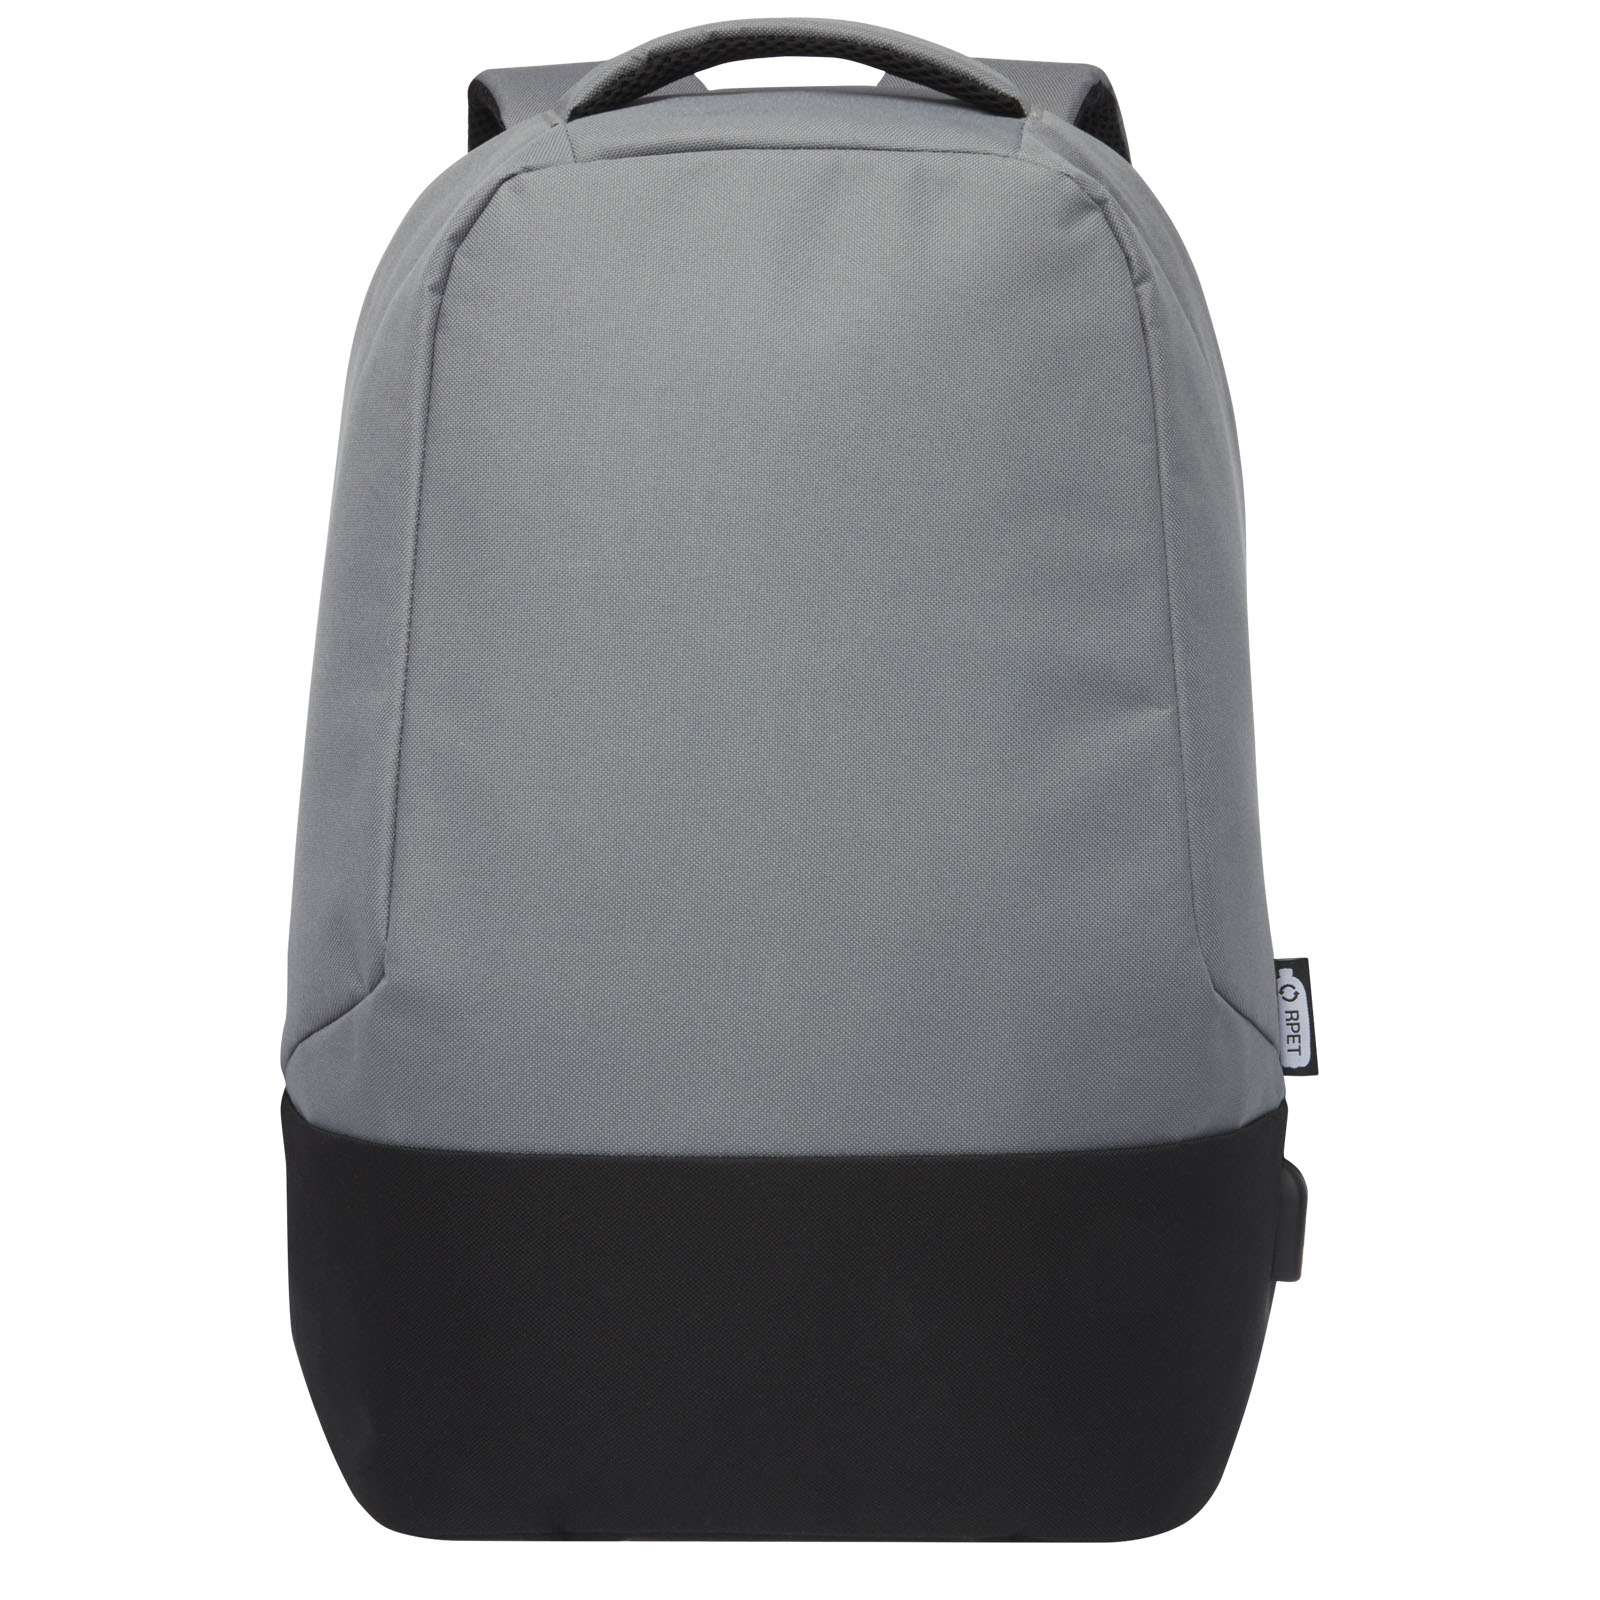 Advertising Laptop Backpacks - Cover GRS RPET anti-theft backpack 18L - 1